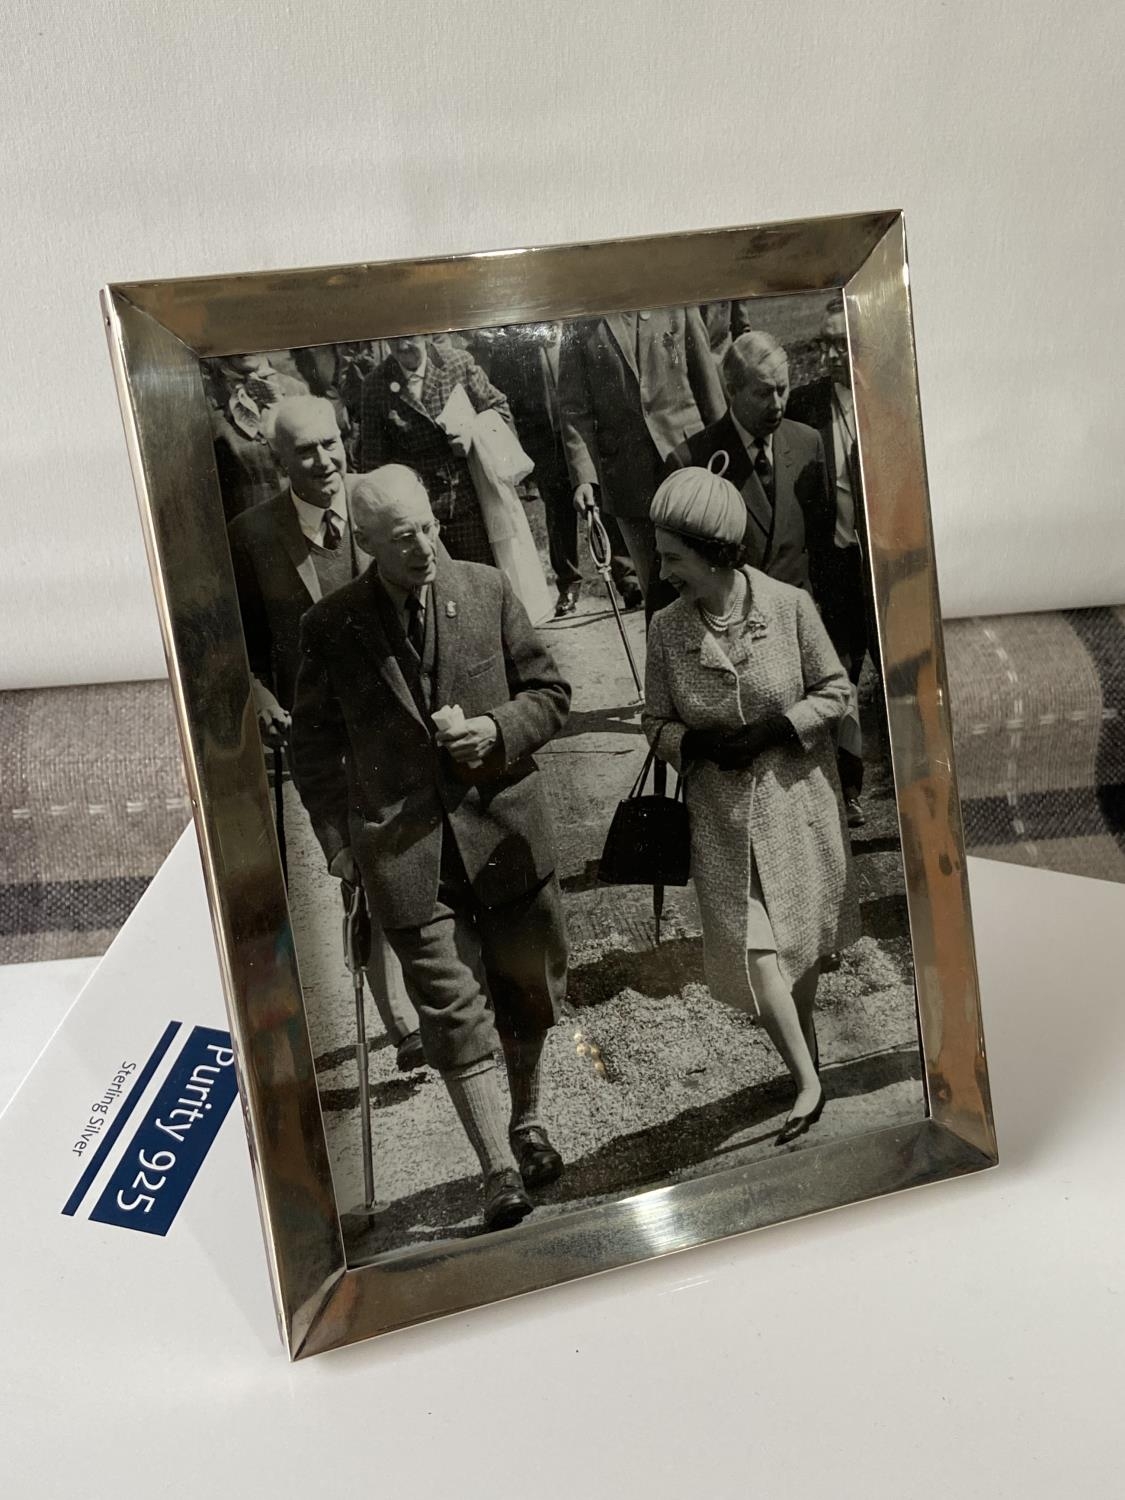 An original photograph of an elderly gentleman walking with Queen Elizabeth II. Fitted within a